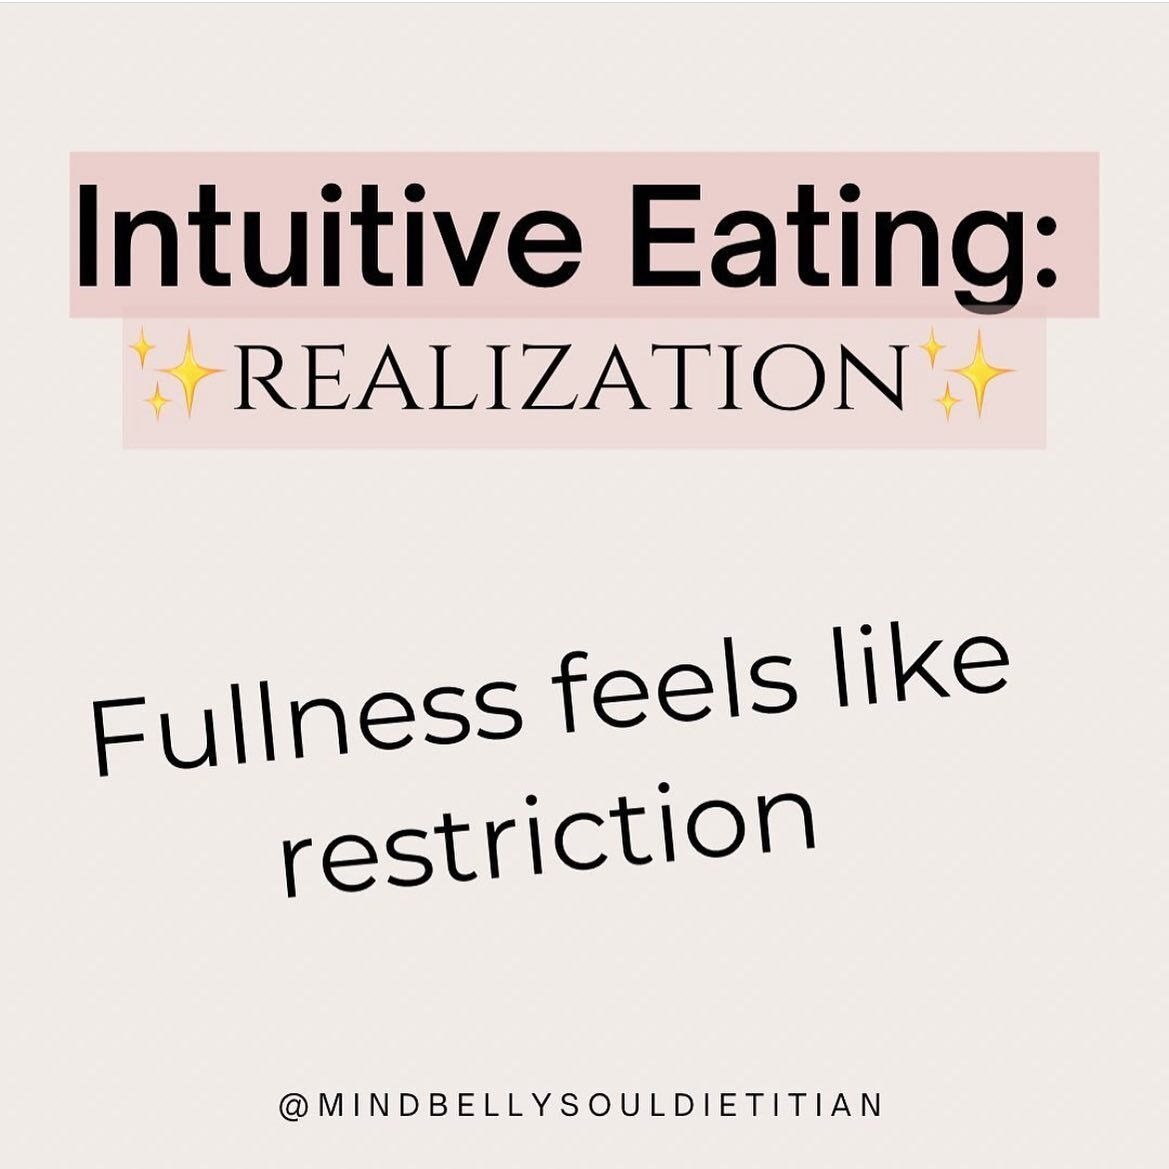 What comes up for you when you begin to notice you&rsquo;re full? 

Are you DEEPLY SADDENED when all of a sudden fullness kicks in and you feel like the meal is supposed to end? 

This is DEEPLY UPSETTING. 

This FEELS like restriction. 

This FEELS 